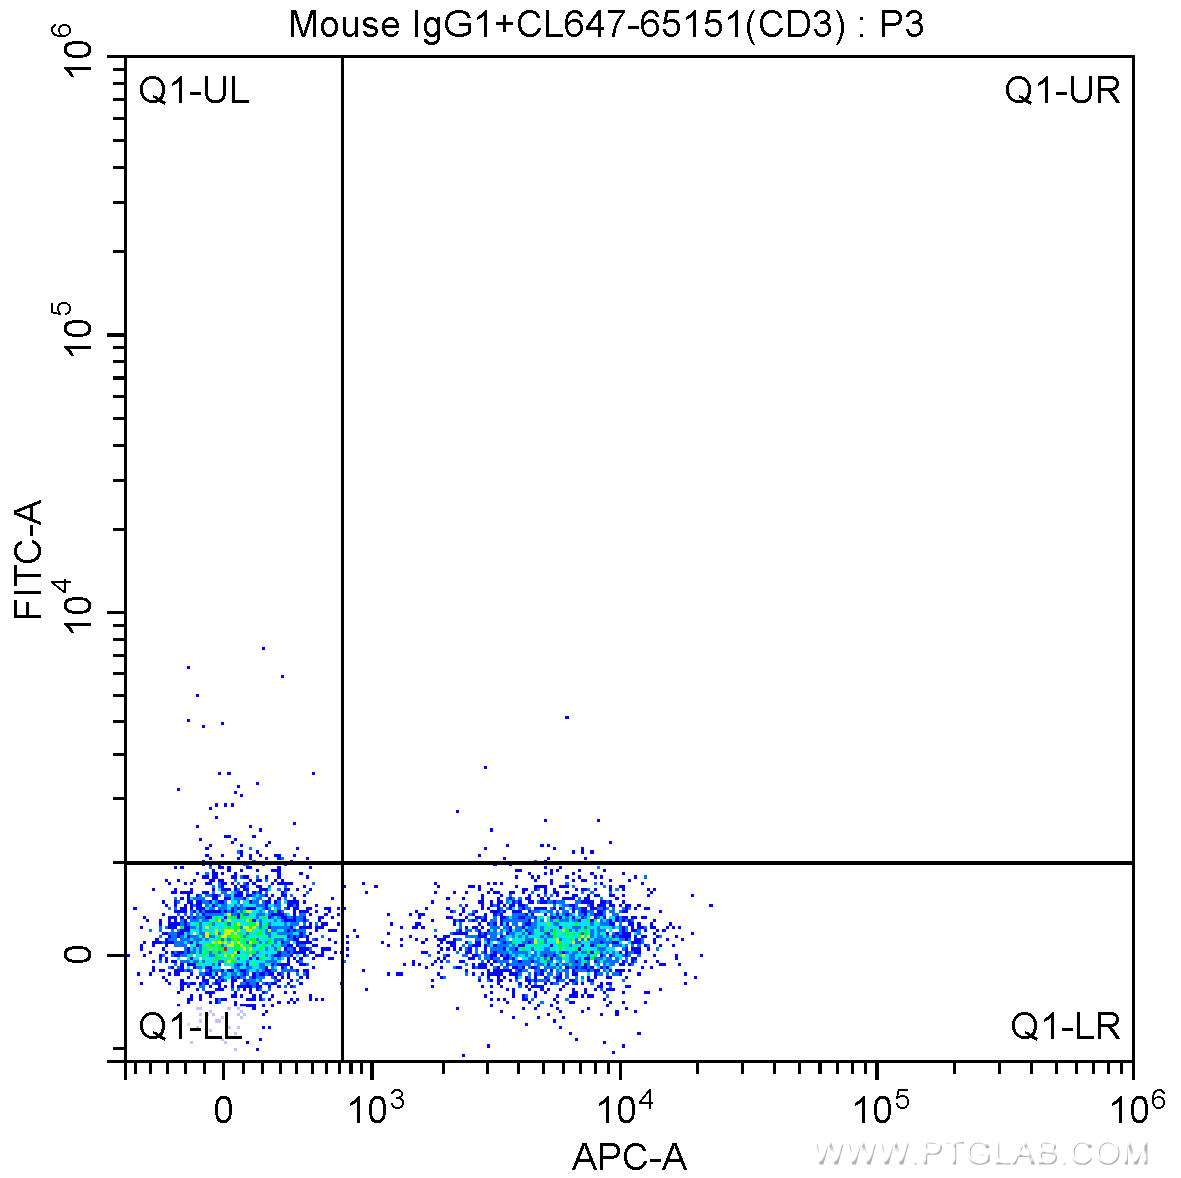 1X10^6 human peripheral blood mononuclear cells (PBMCs) were surface stained with CoraLite®647-conjugated Anti-Human CD3 (CL647-65151, Clone: UCHT1), 0.25 ug Mouse IgG1 Isotype Control and CoraLite®488-Conjugated AffiniPure Goat Anti-Mouse IgG(H+L) at dilution 1:1000. Cells were not fixed.